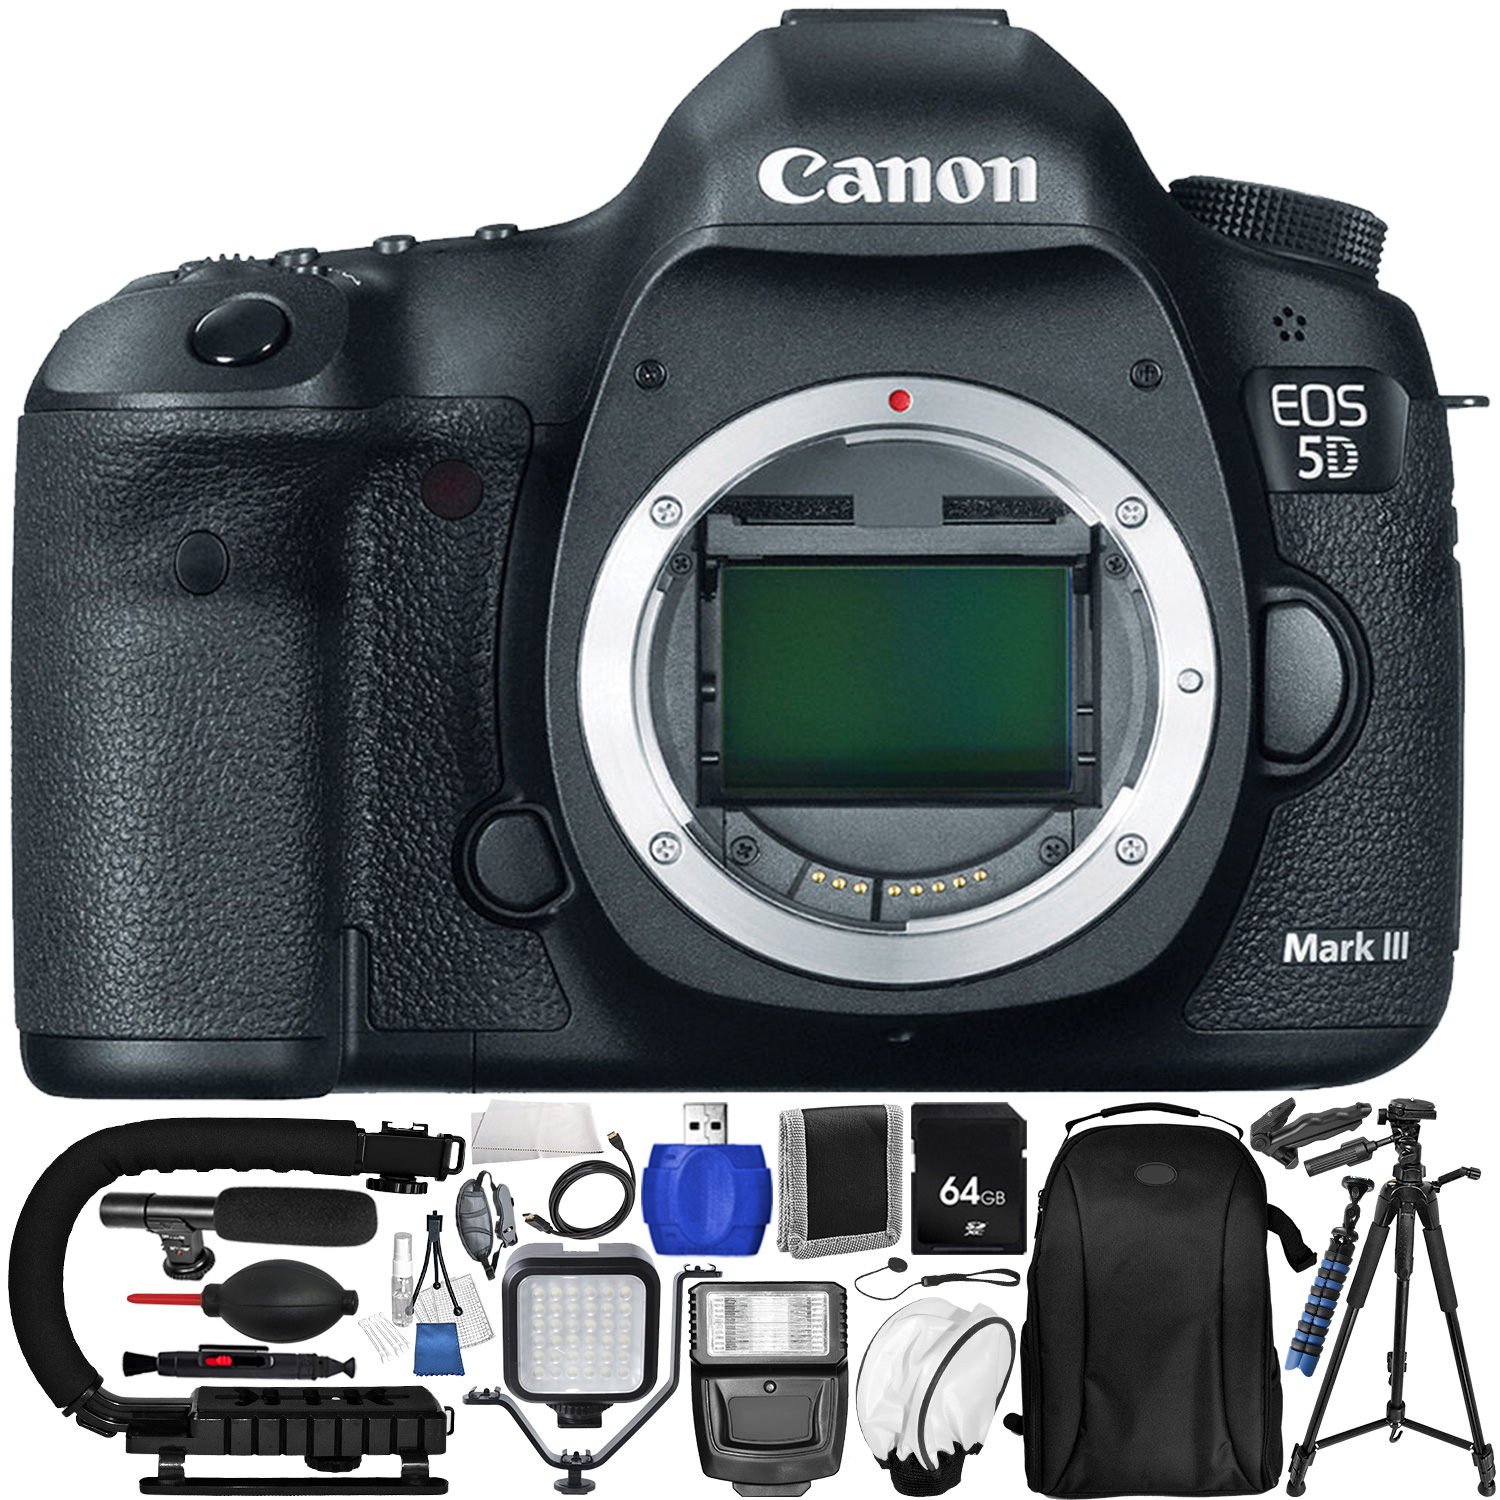 Canon EOS 5D Mark III DSLR Camera (Body Only) with Accessory Bundle